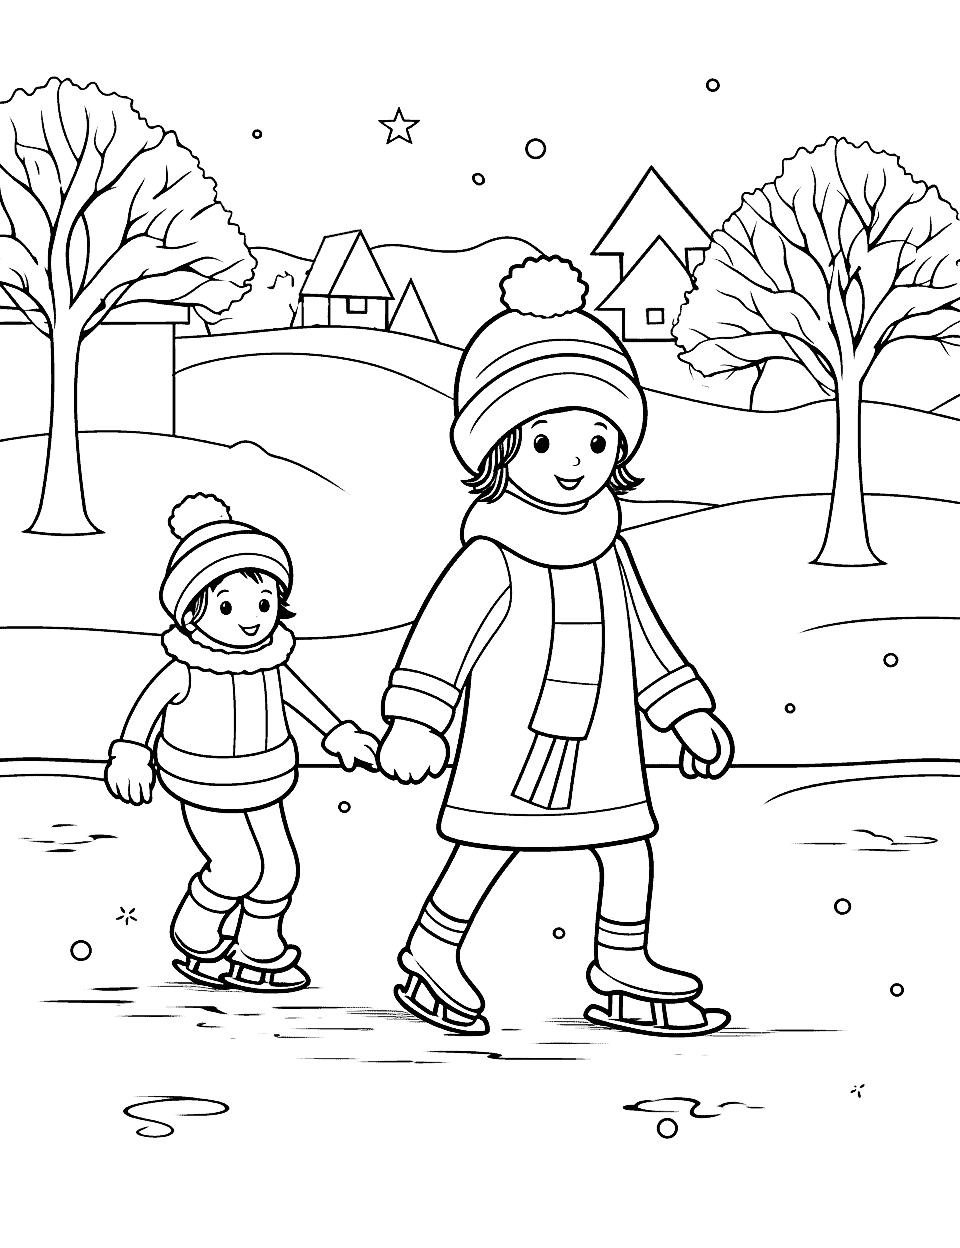 Simple Ice Skating Scene Winter Coloring Page - A basic image of kids ice skating on a frozen pond.